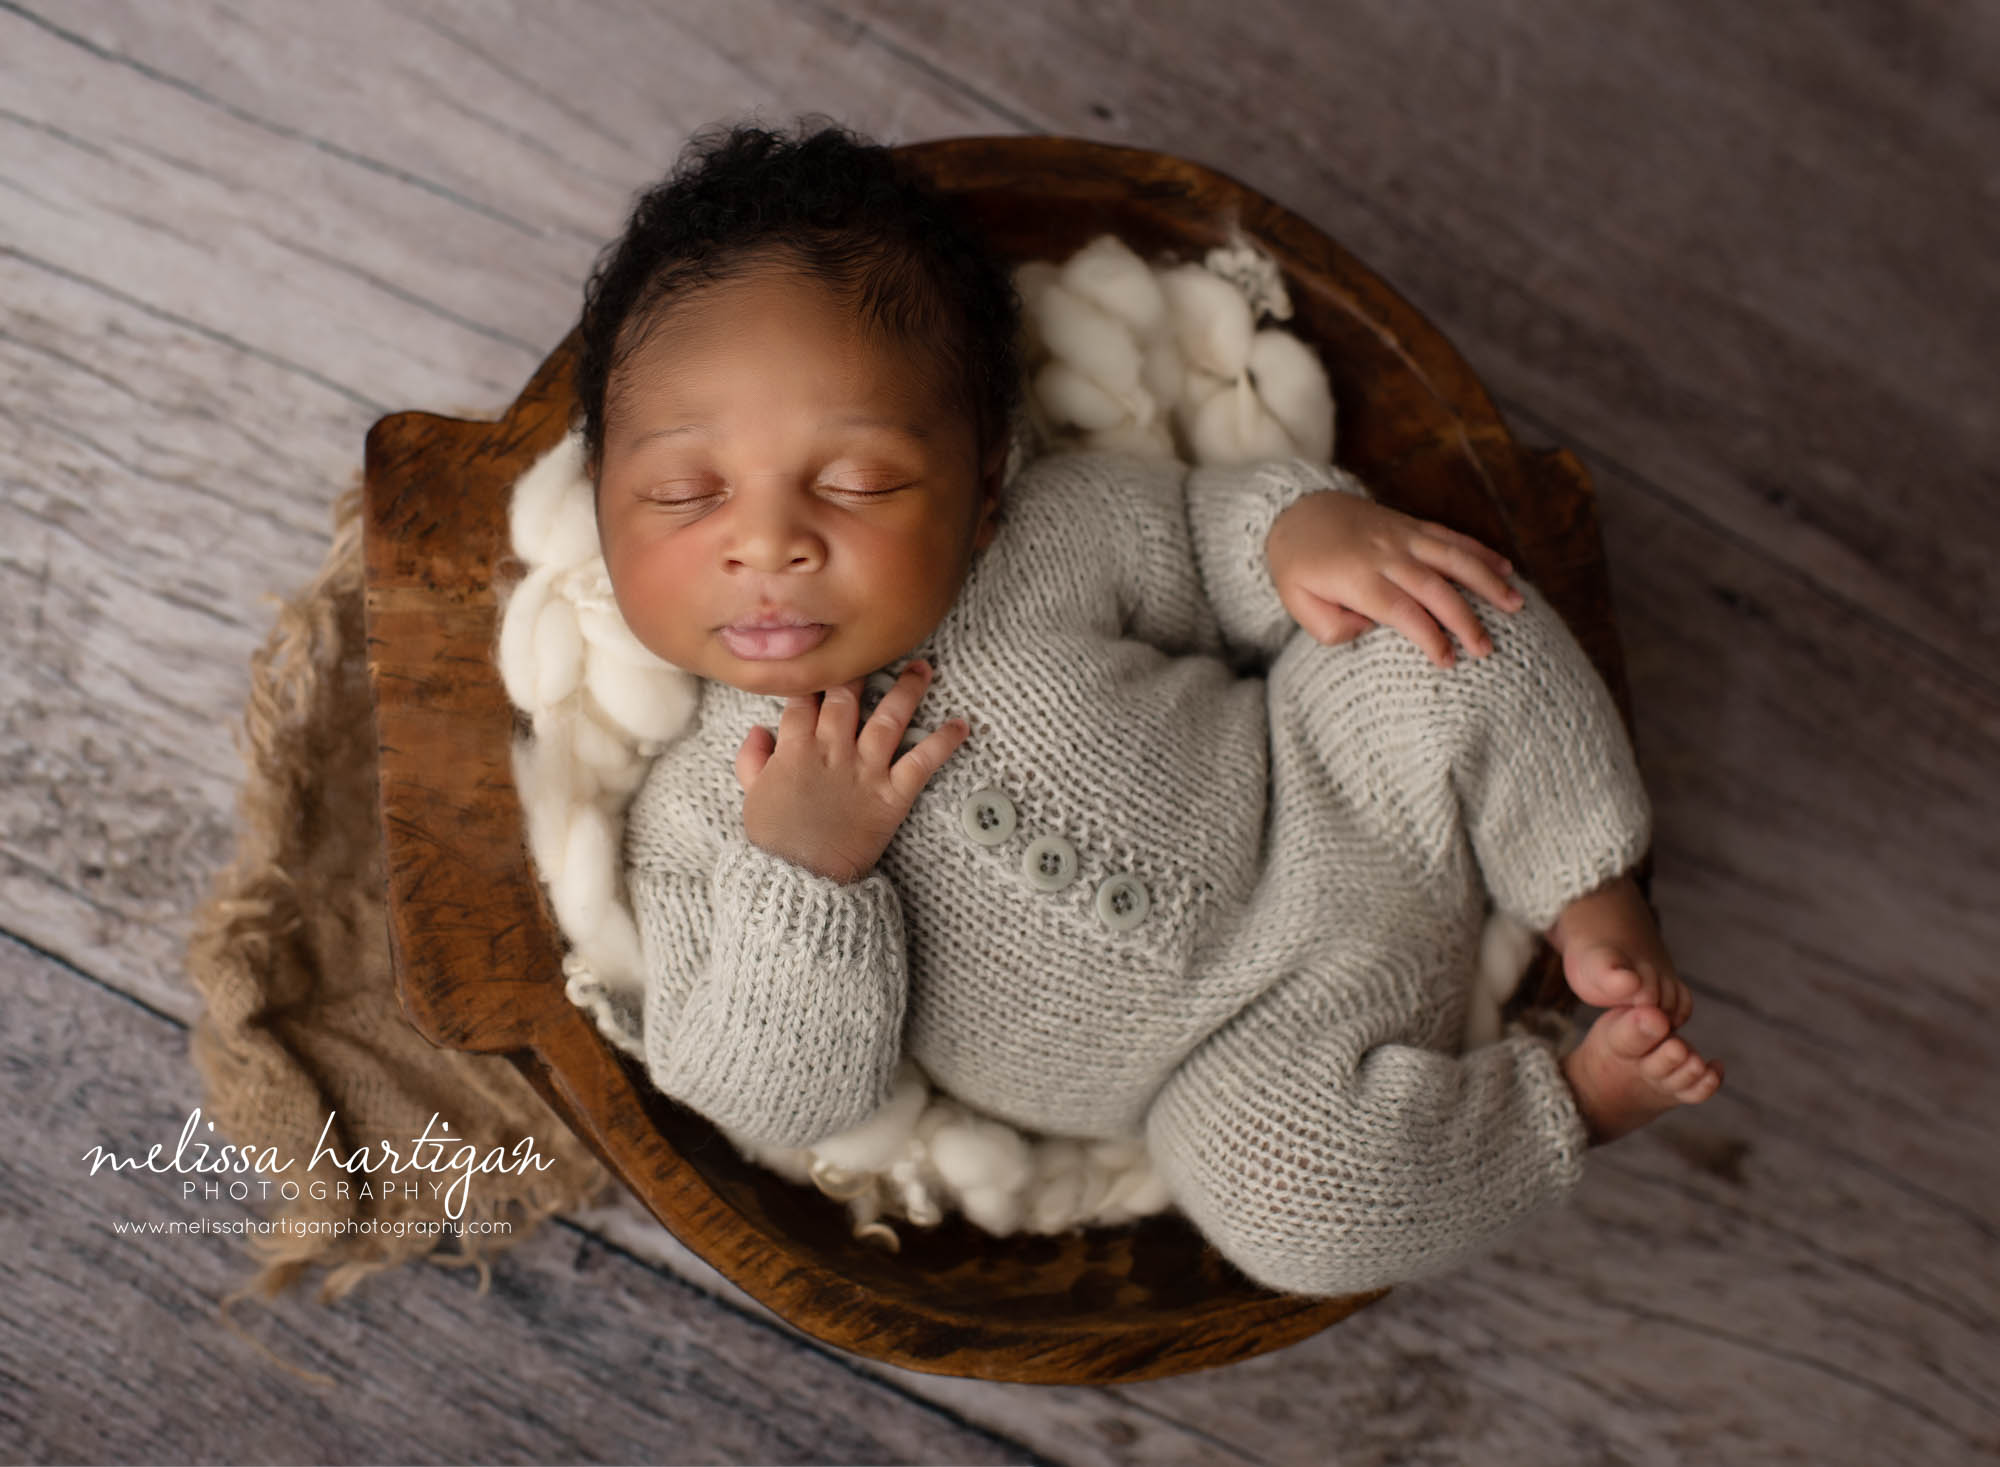 newborn baby boy wearing gray knitted outfit posed in wooden bowl newborn photography CT